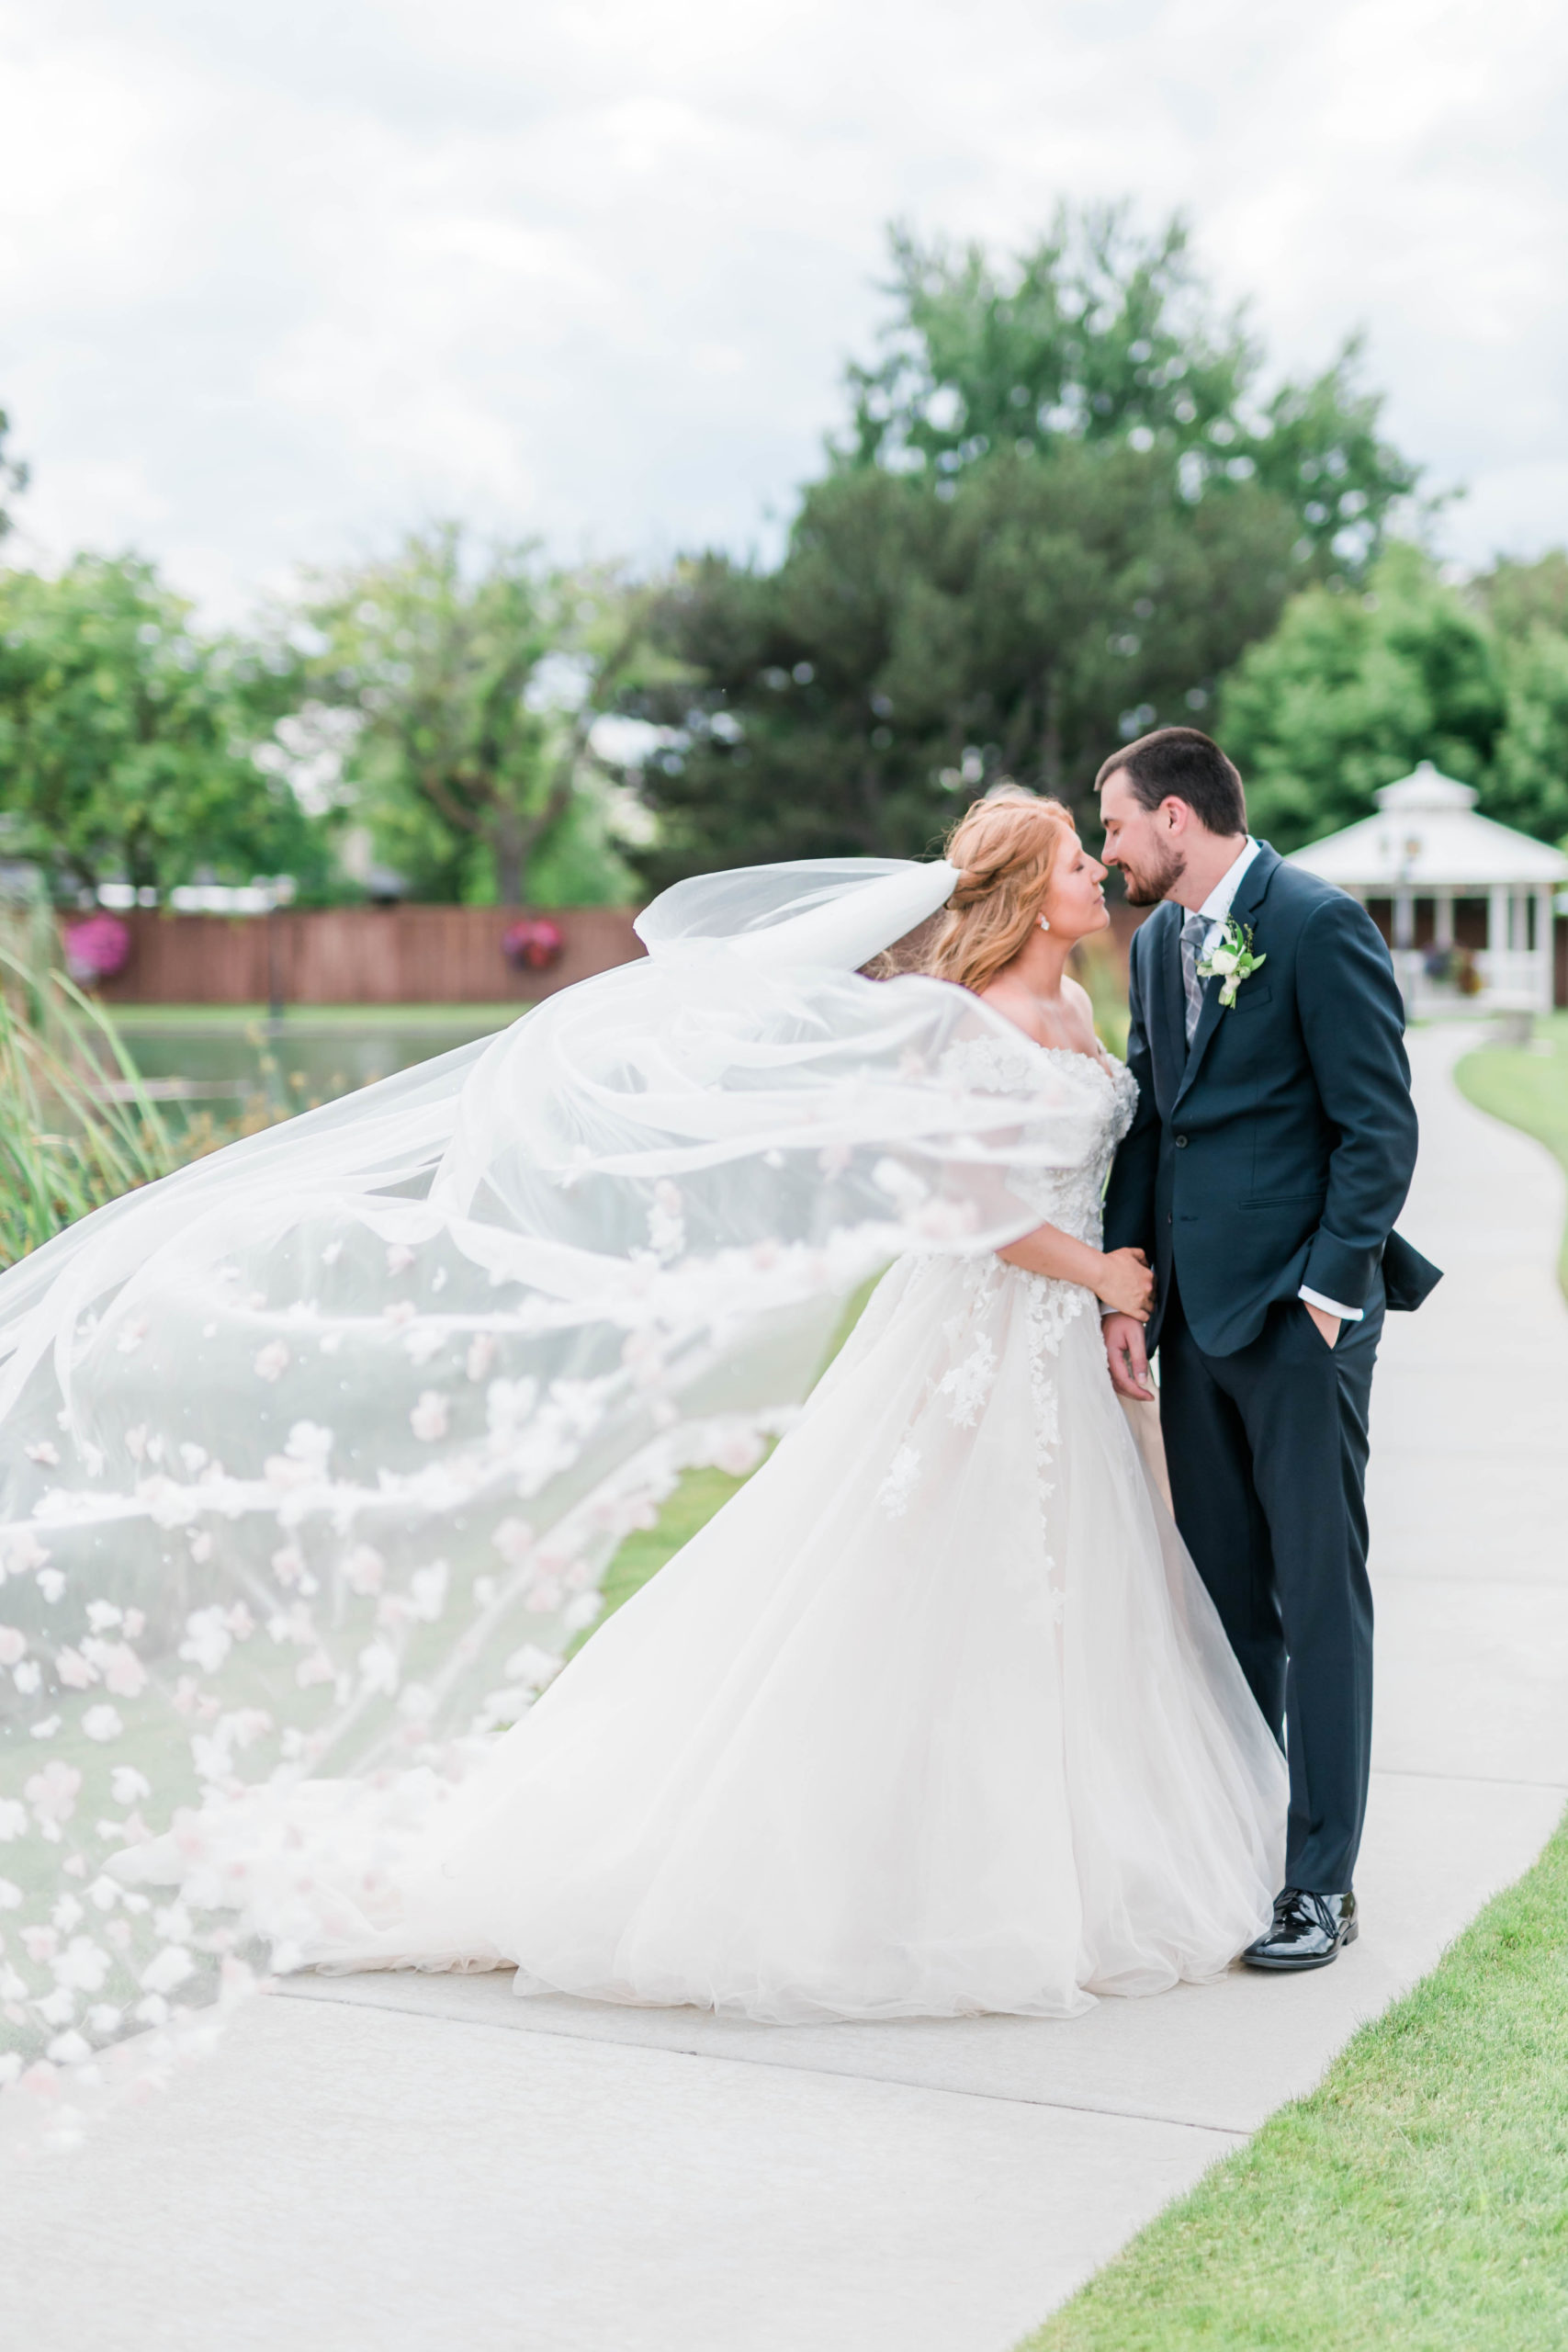 Boise wedding photographer captures bride adn groom holding hands as they lean into kiss each other and the brides veil blows in the wind